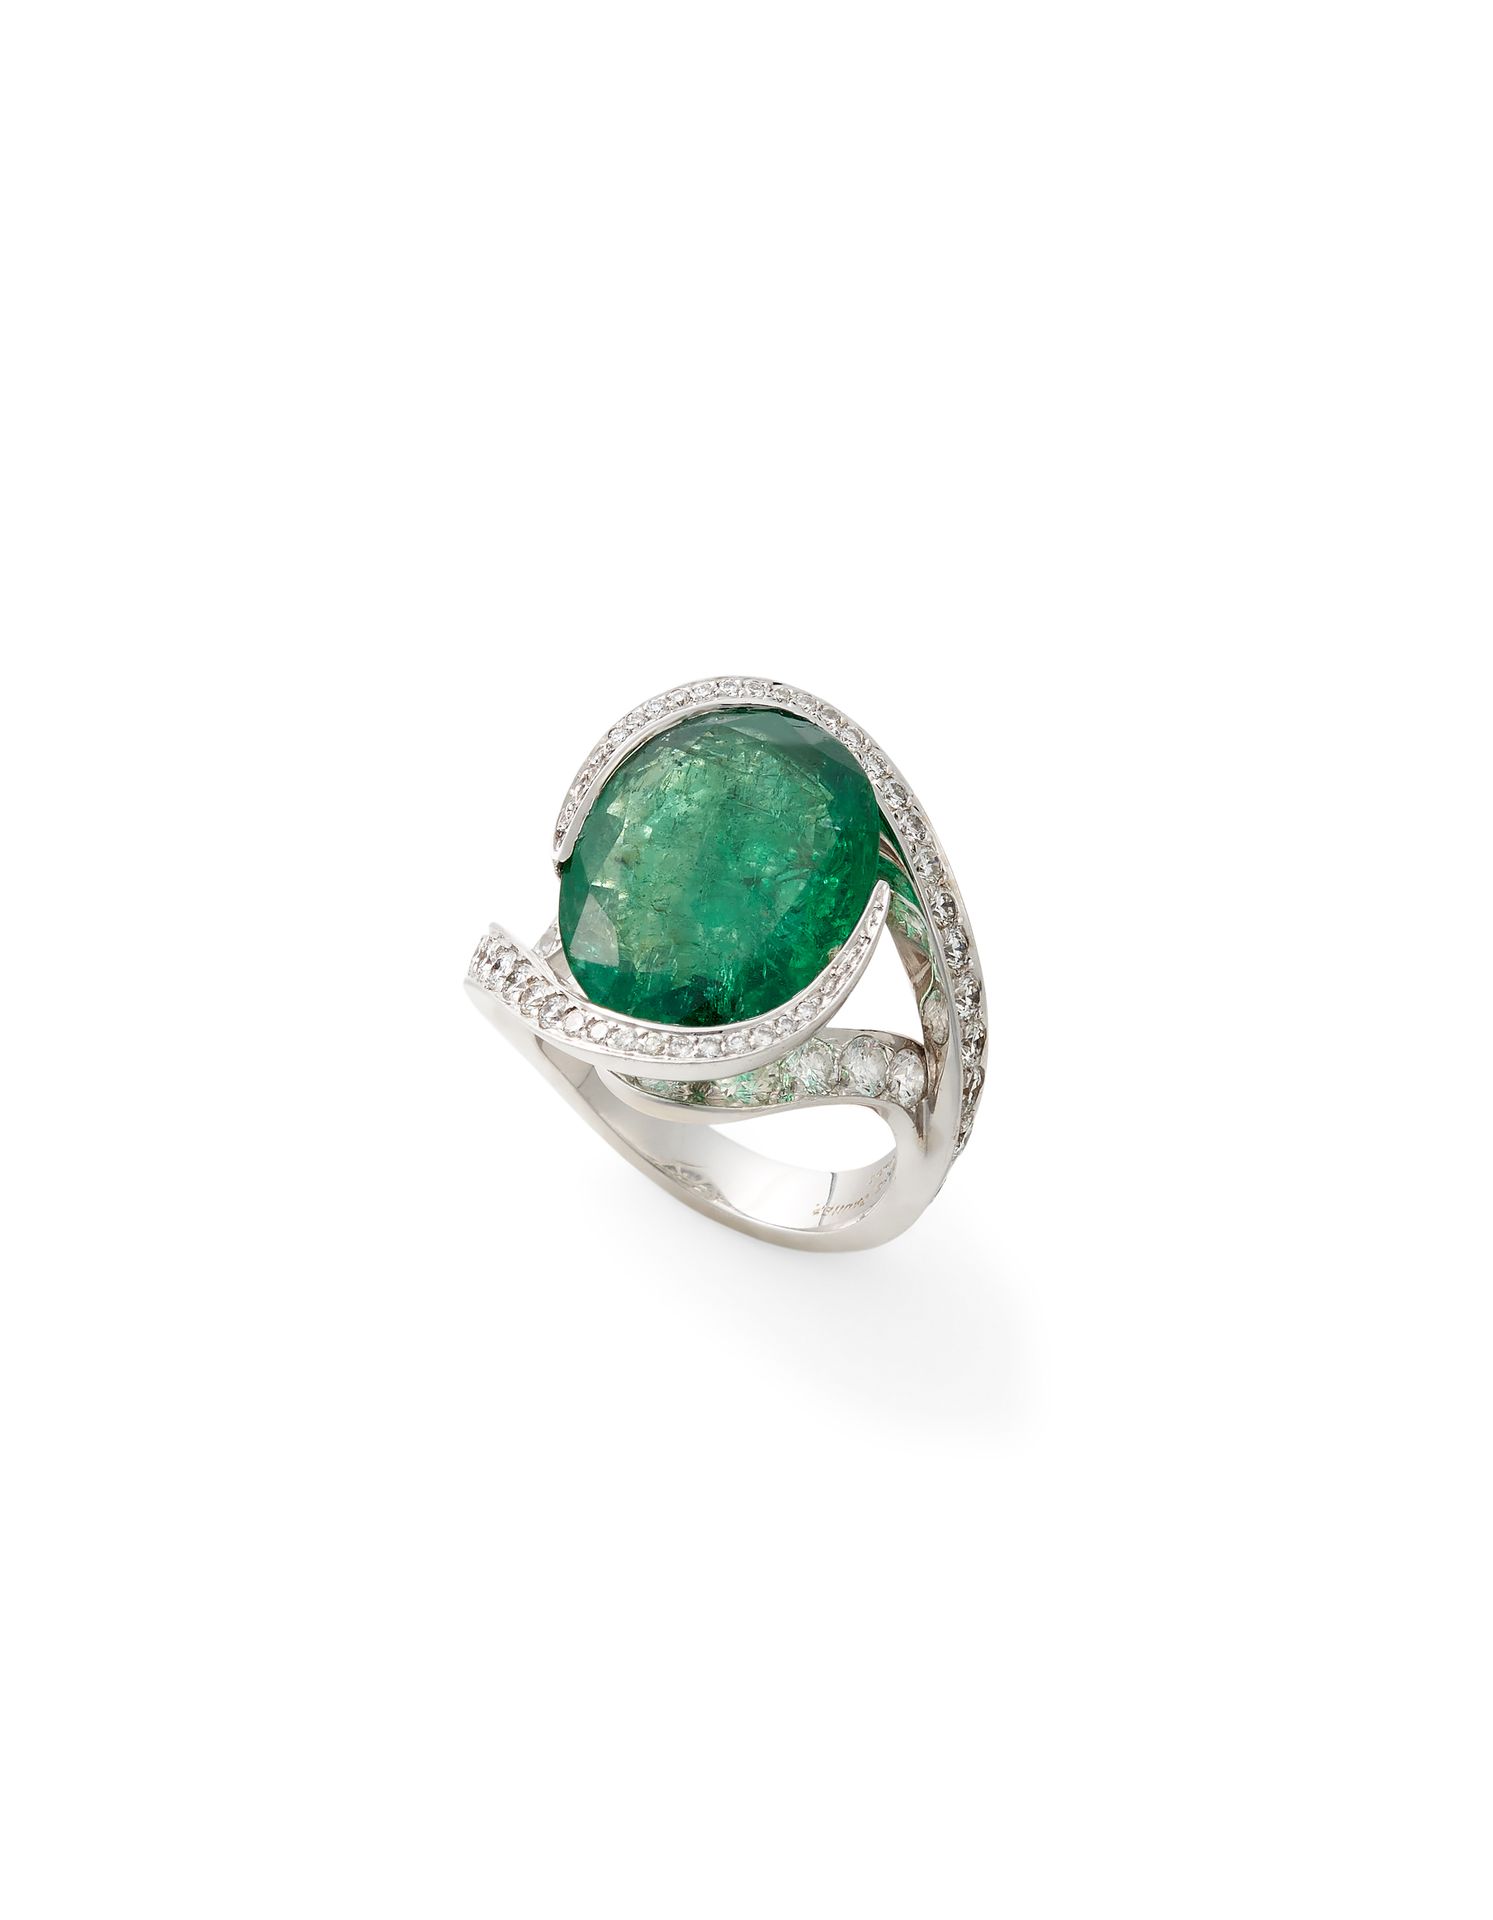 Null LORENZ BAÜMER EMERALD RING In 18K white gold, set with a 6,7 ct intense gre&hellip;